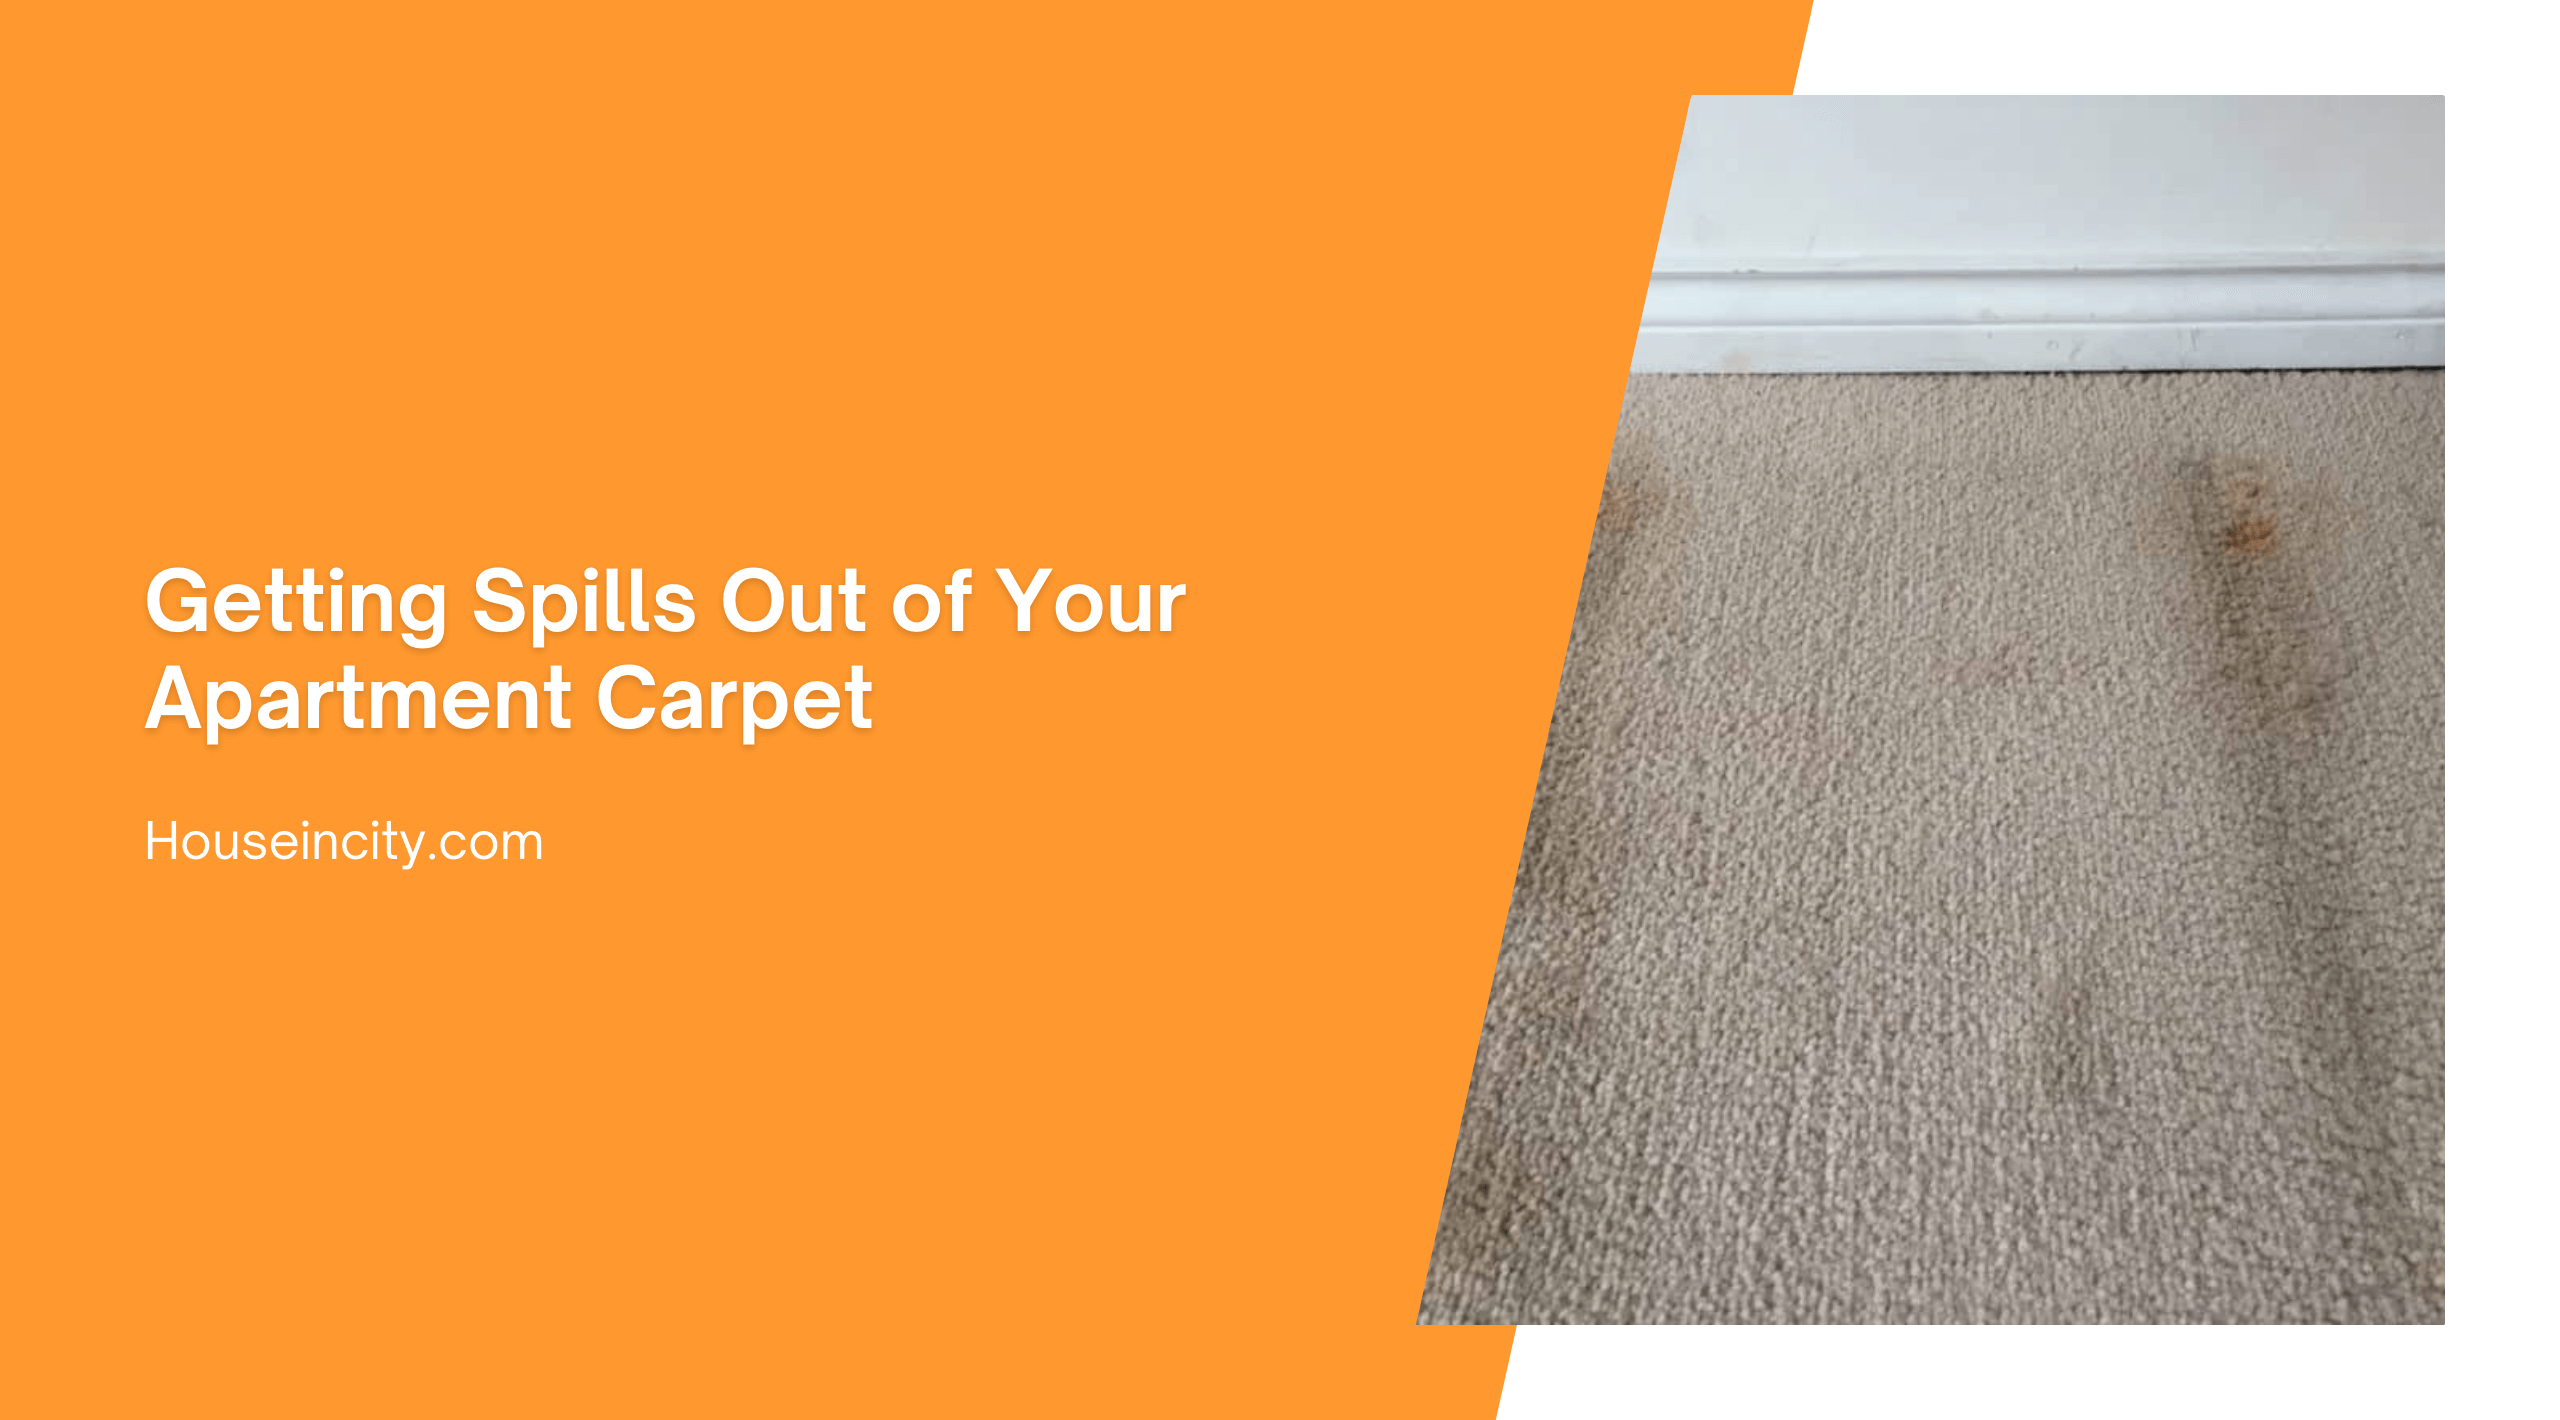 Getting Spills Out of Your Apartment Carpet